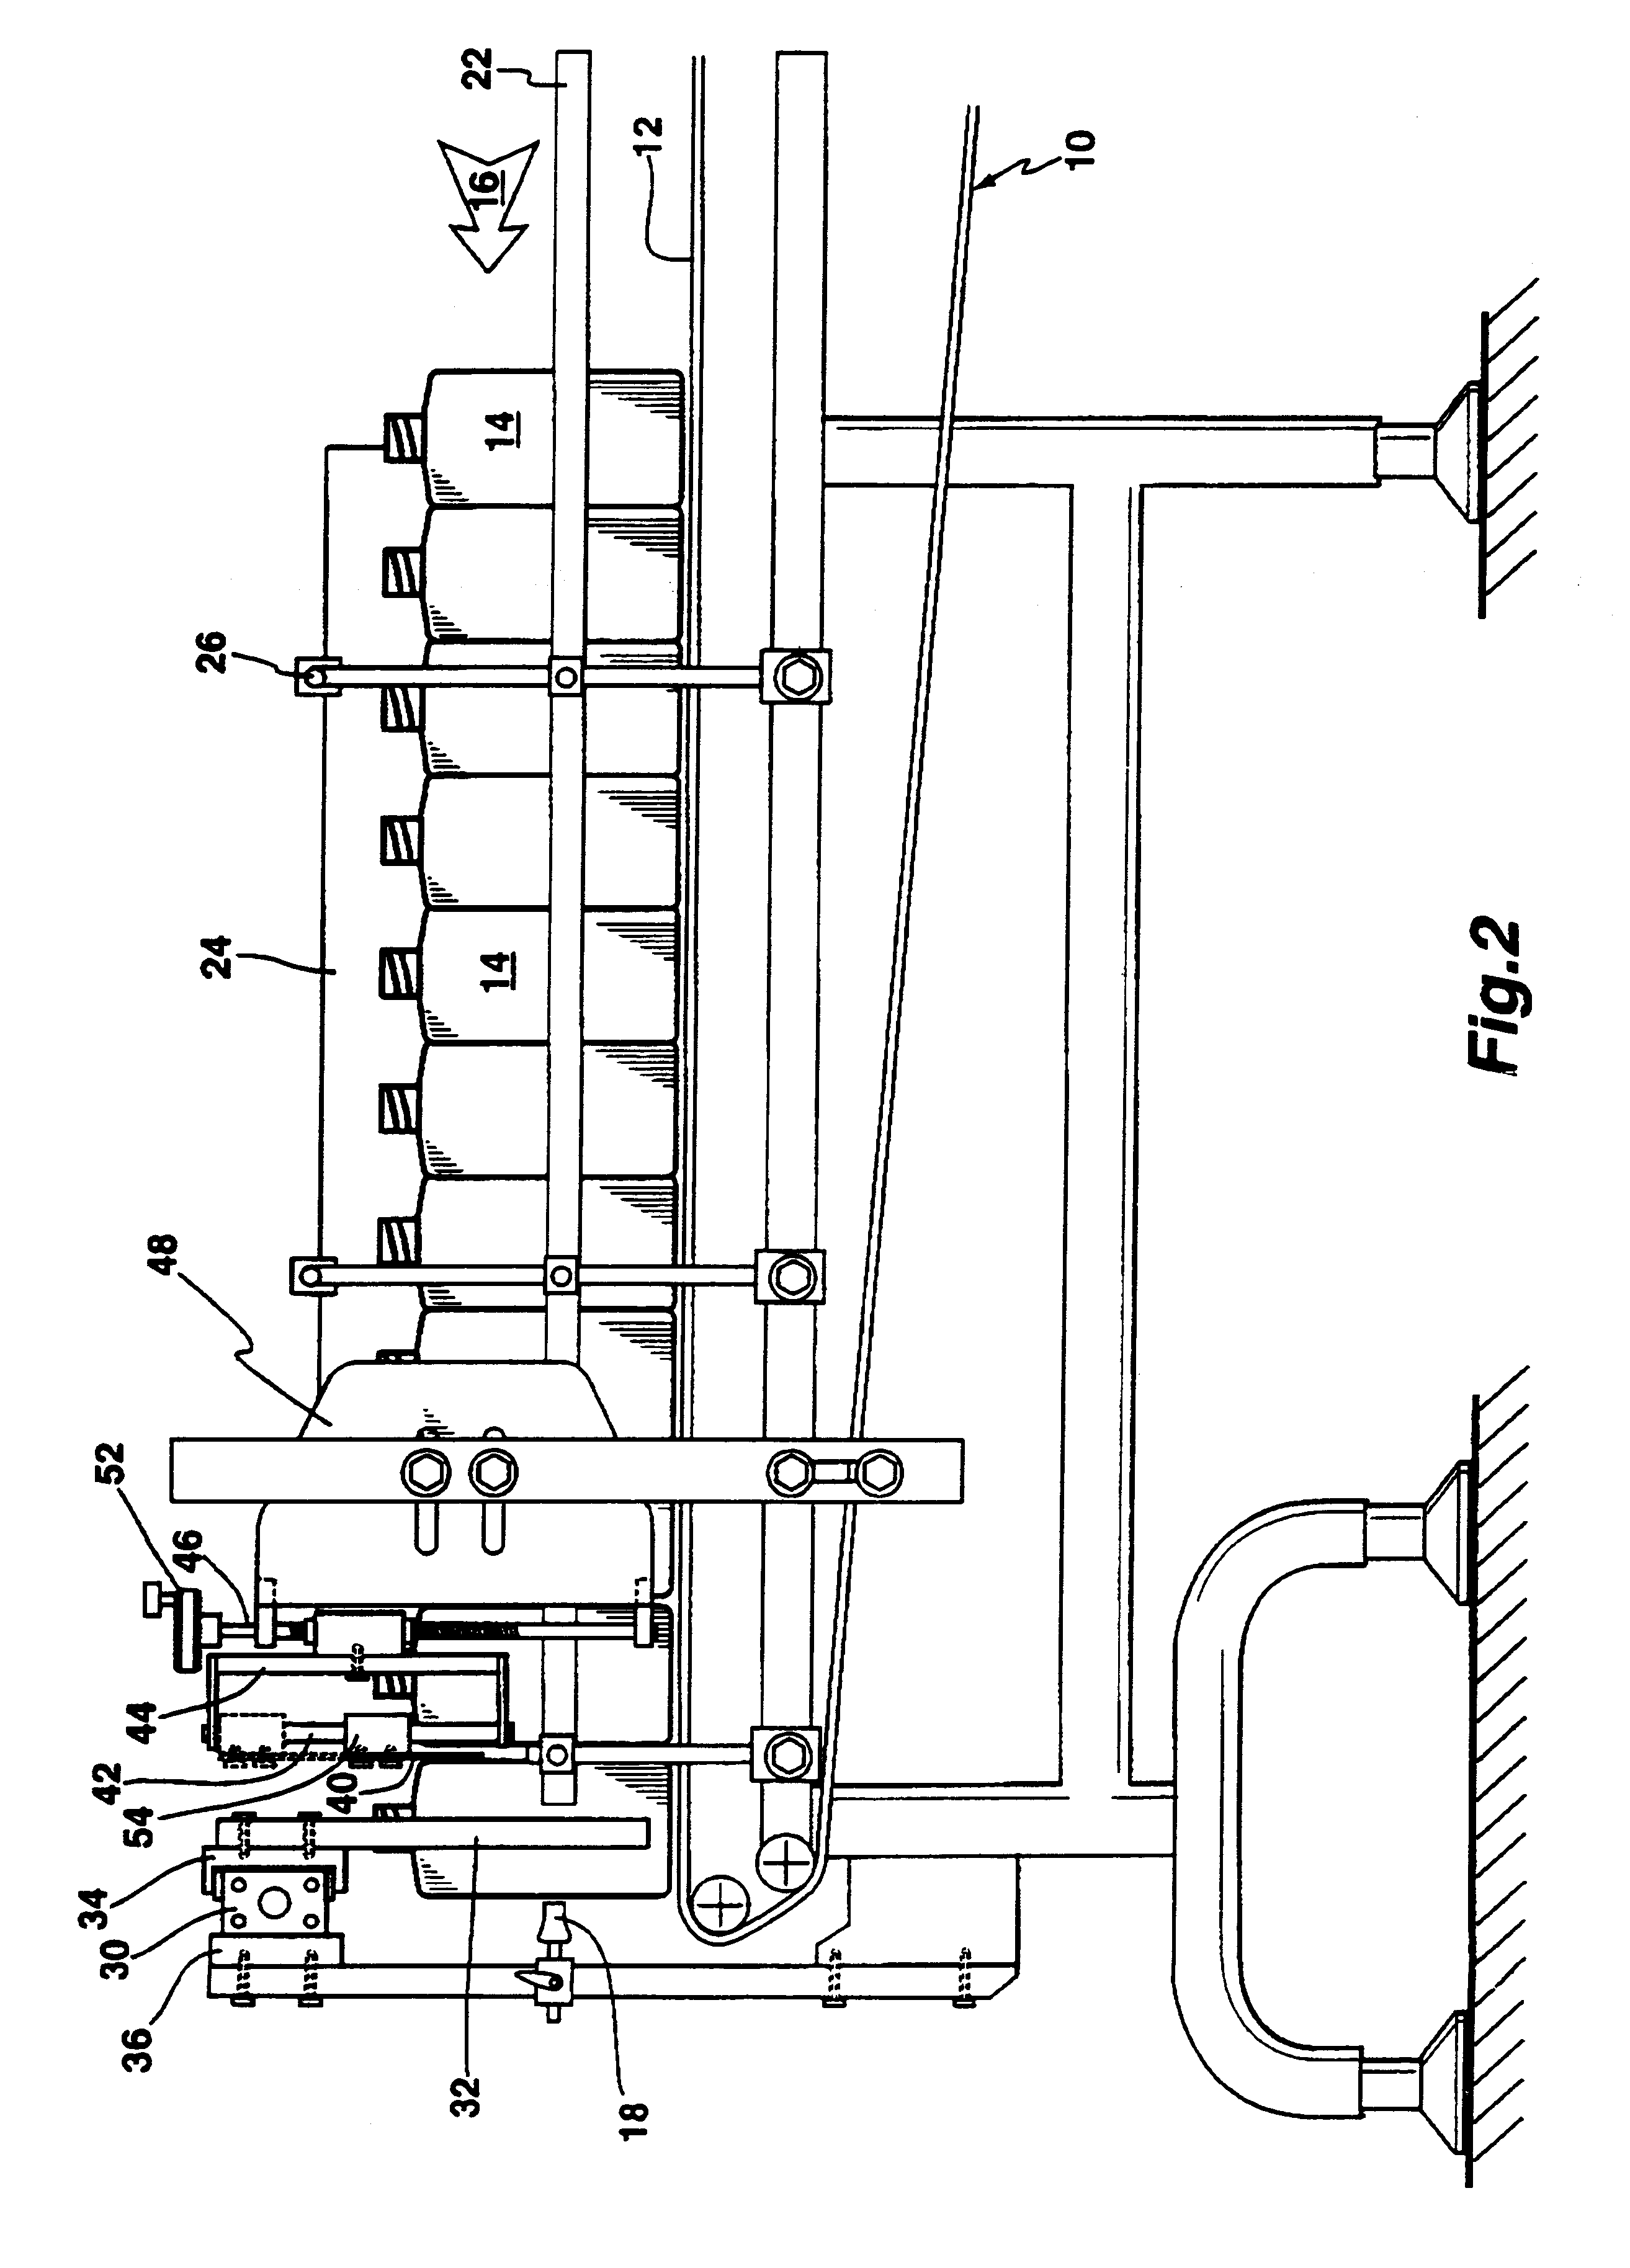 Method and apparatus for feeding containers in serial order on a conveyor belt